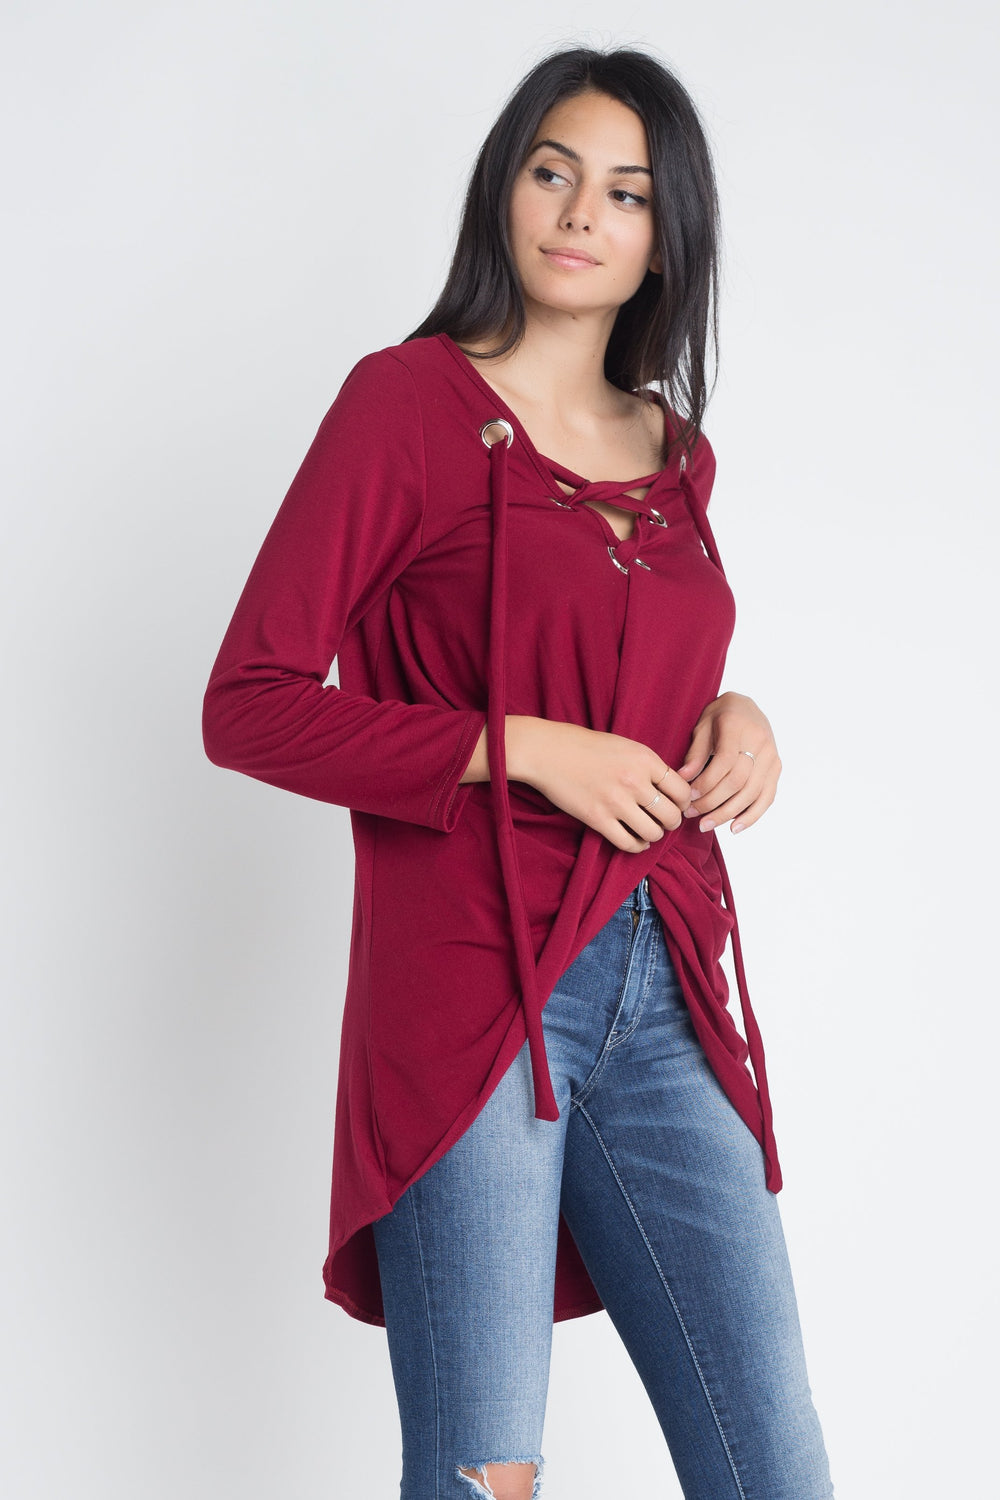 Women's Lace Up Wrap Long Sleeve Top.